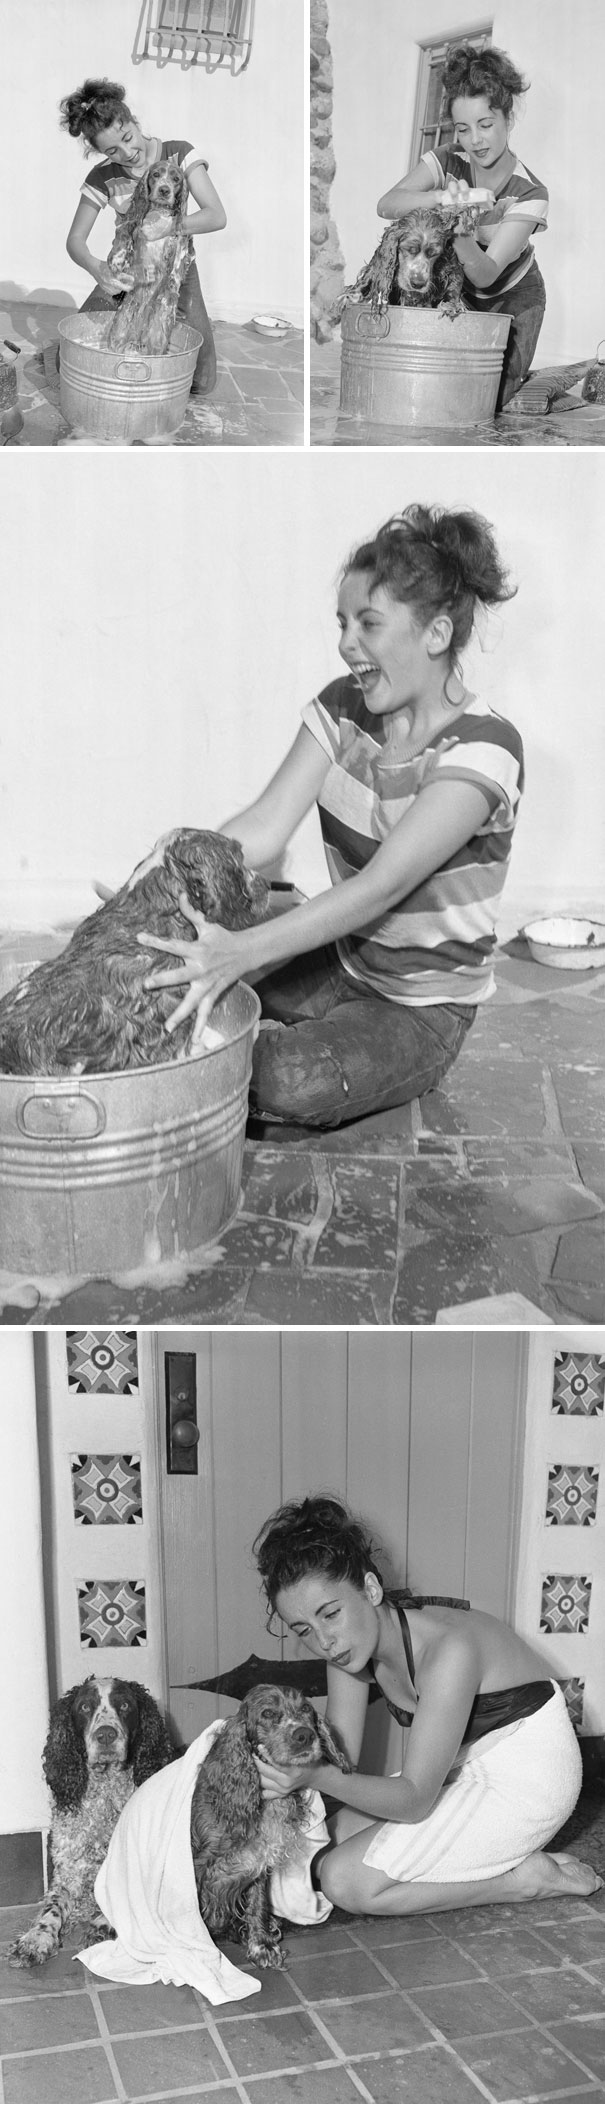 17-Year-Old Elizabeth Taylor Giving A Bath To Her Cocker Spaniel Amy In 1949